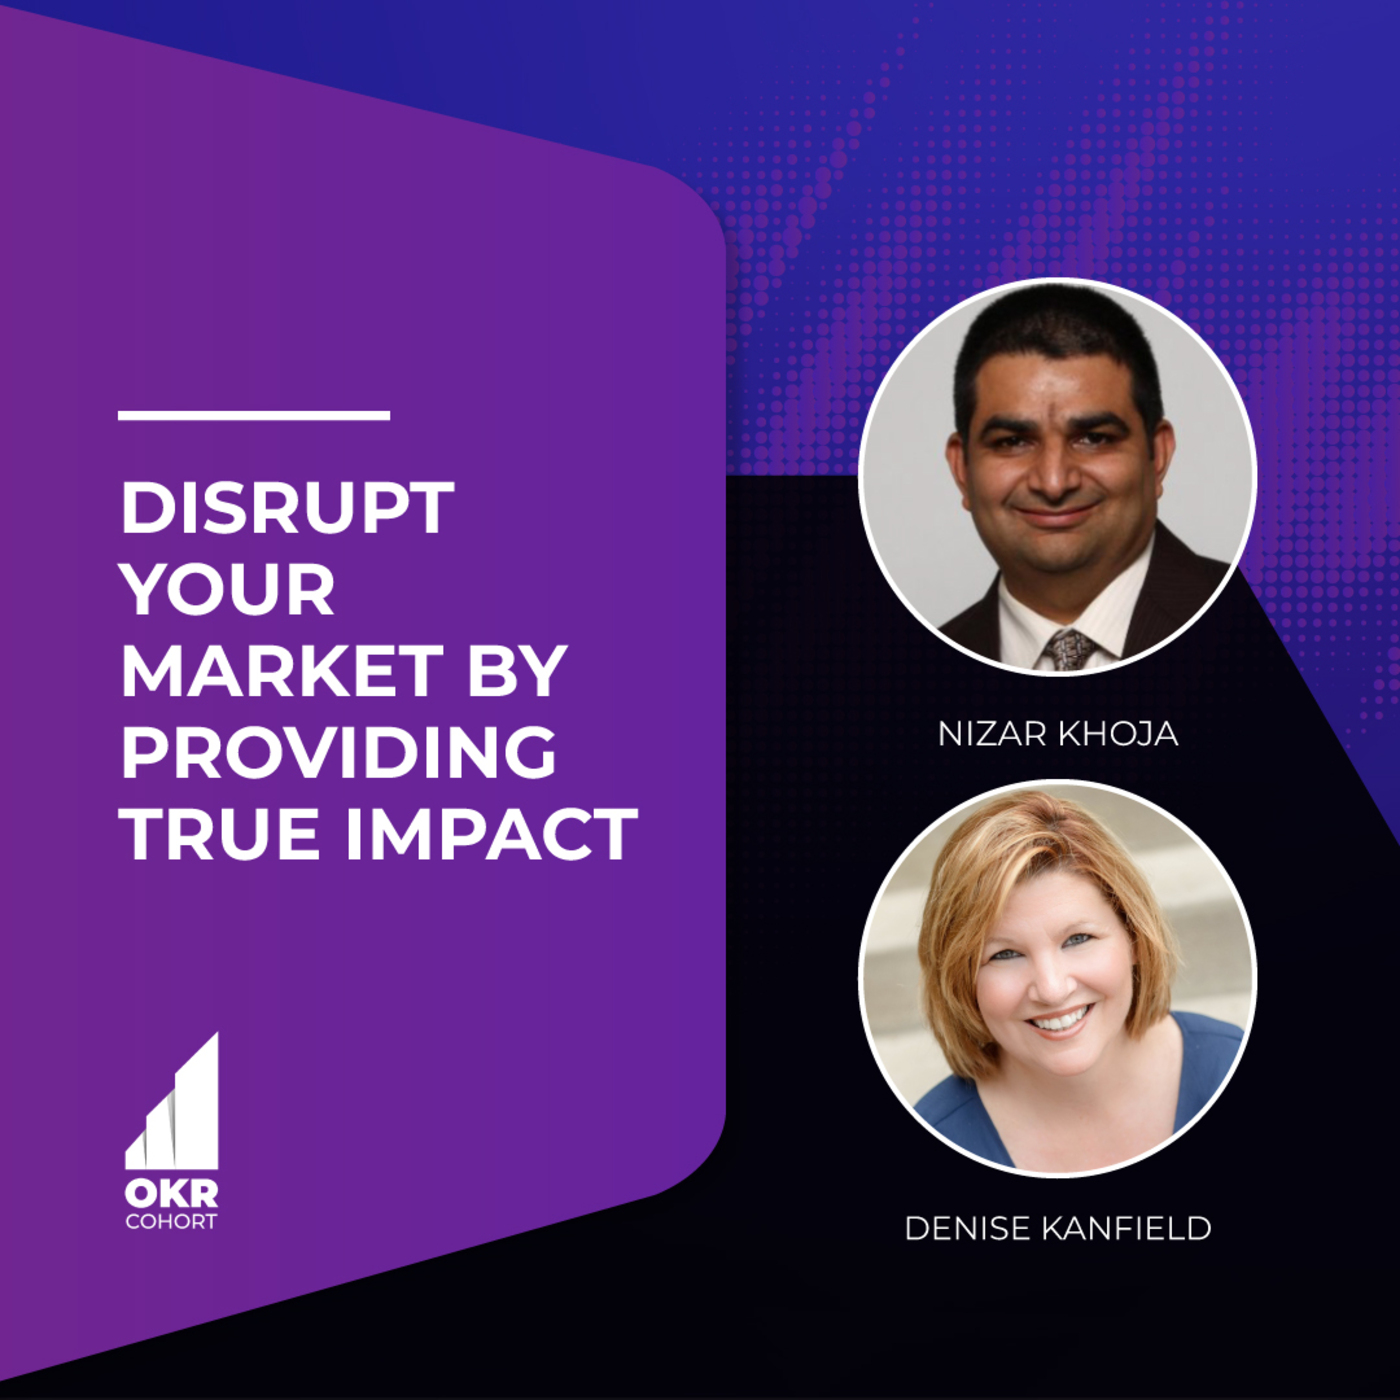 Disrupt Your Market by Providing True Impact